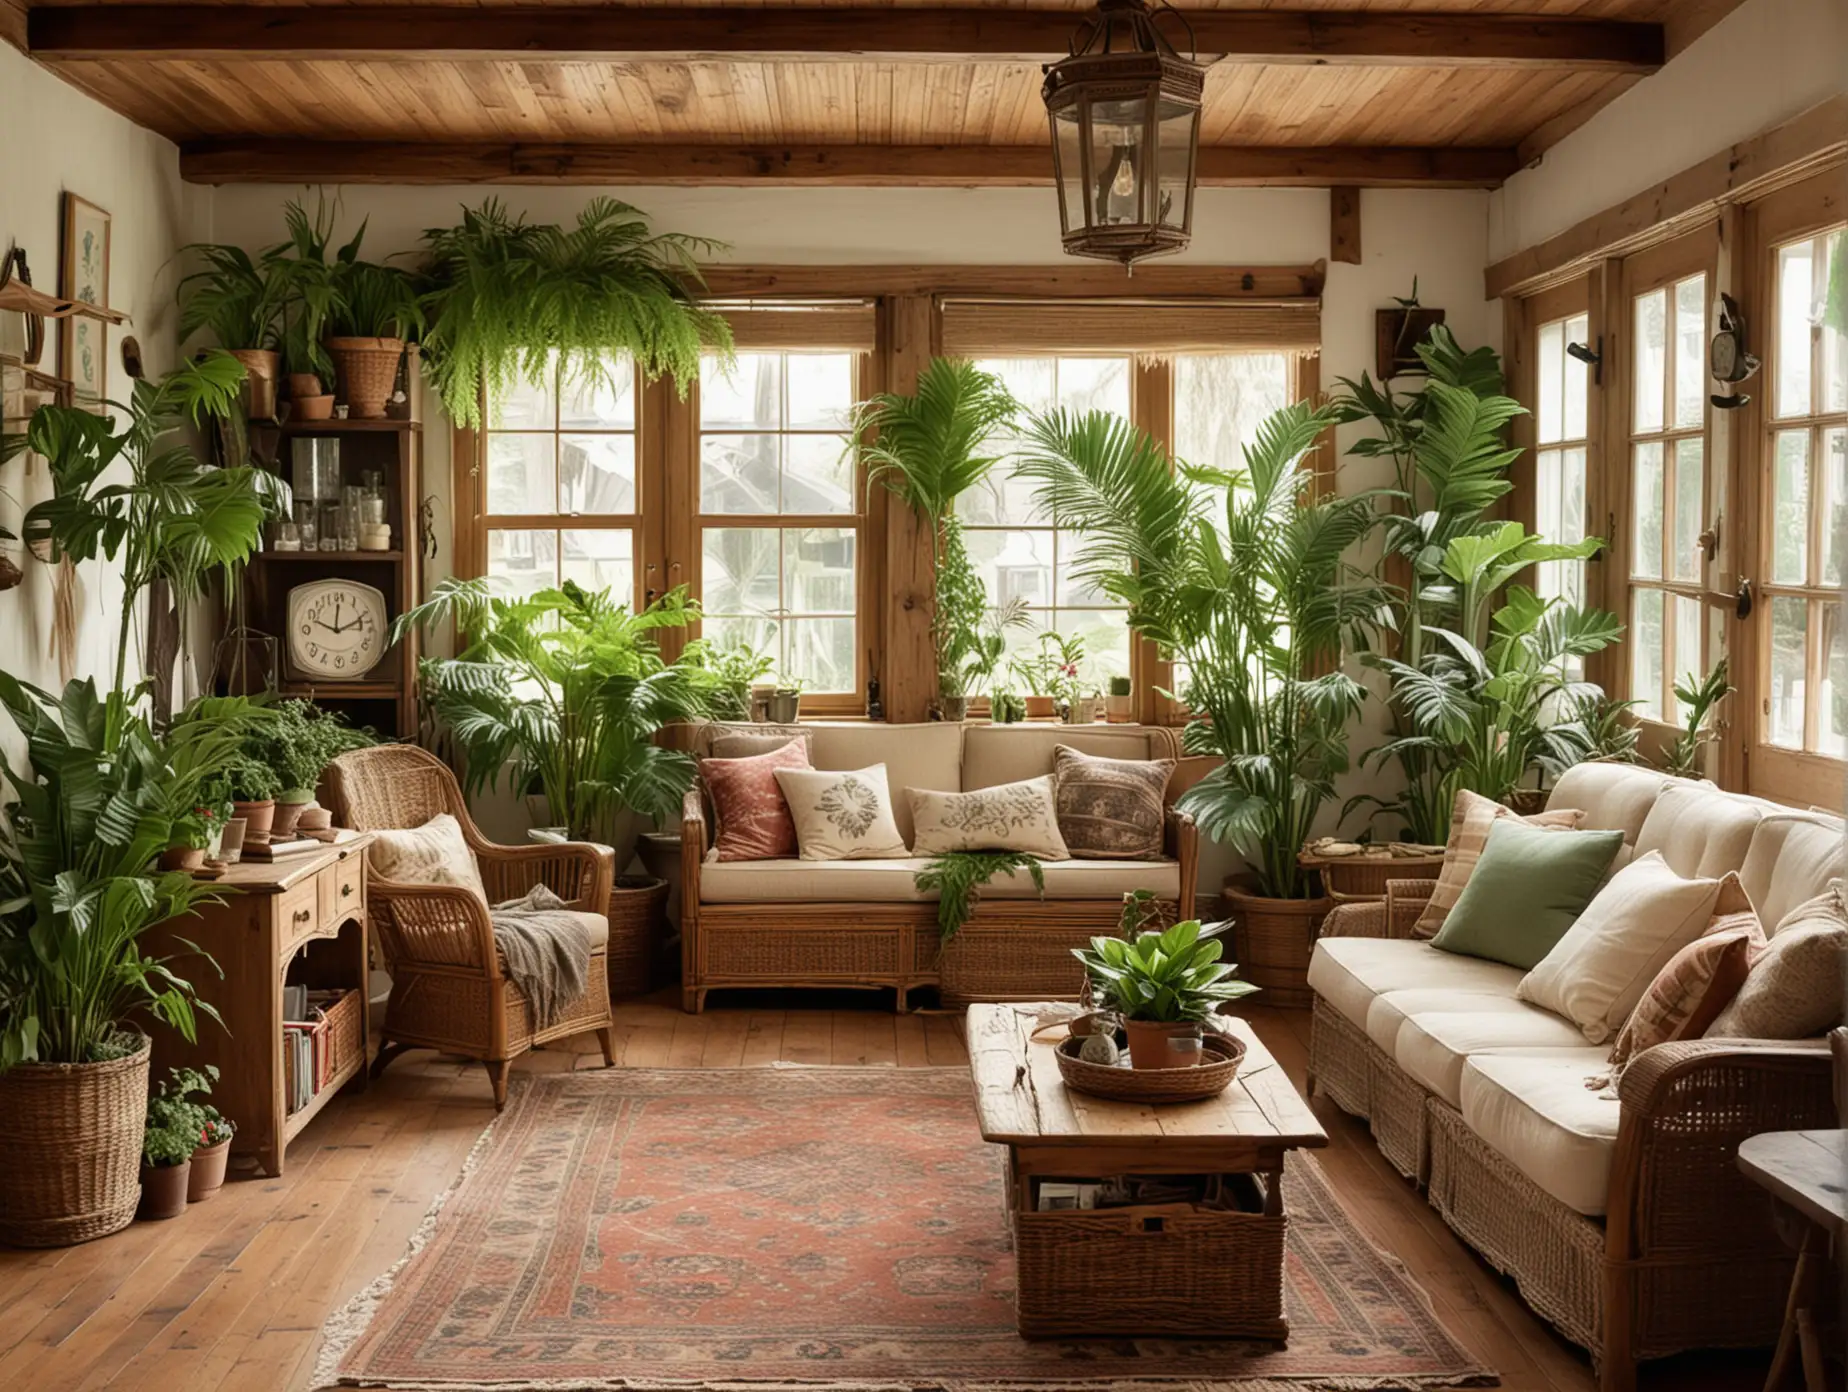 Rustic Vintage Living Room with House Plants: Create a cozy vintage-inspired living room with rustic decor. Include a mix of wooden furniture and wicker baskets. Add house plants like ferns and potted palm trees to bring a touch of nature indoors. The room should have a large glass door leading to a sunny porch, with a vintage clock on the wall and a thatched roof visible from the inside